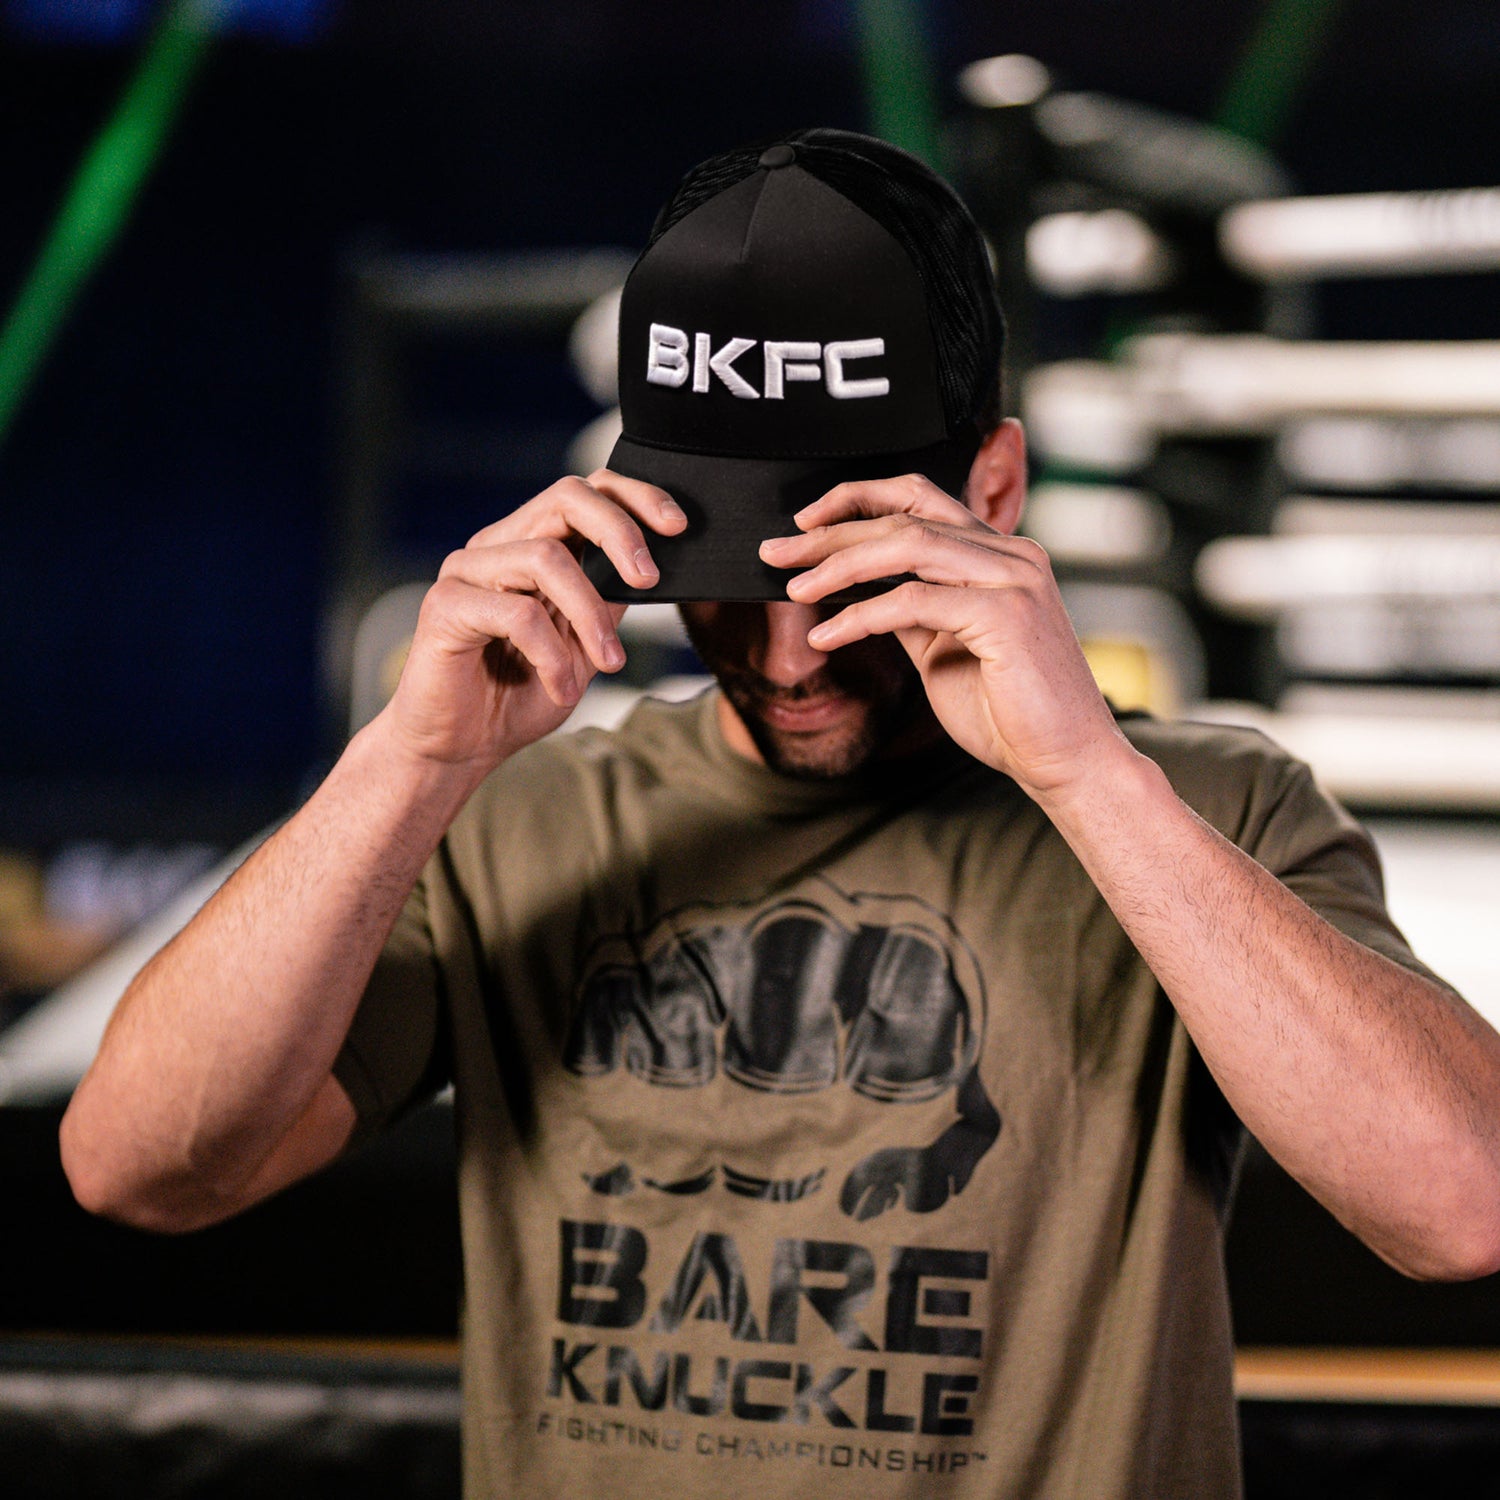 Bare Knuckle Fighting Championship Official Hat